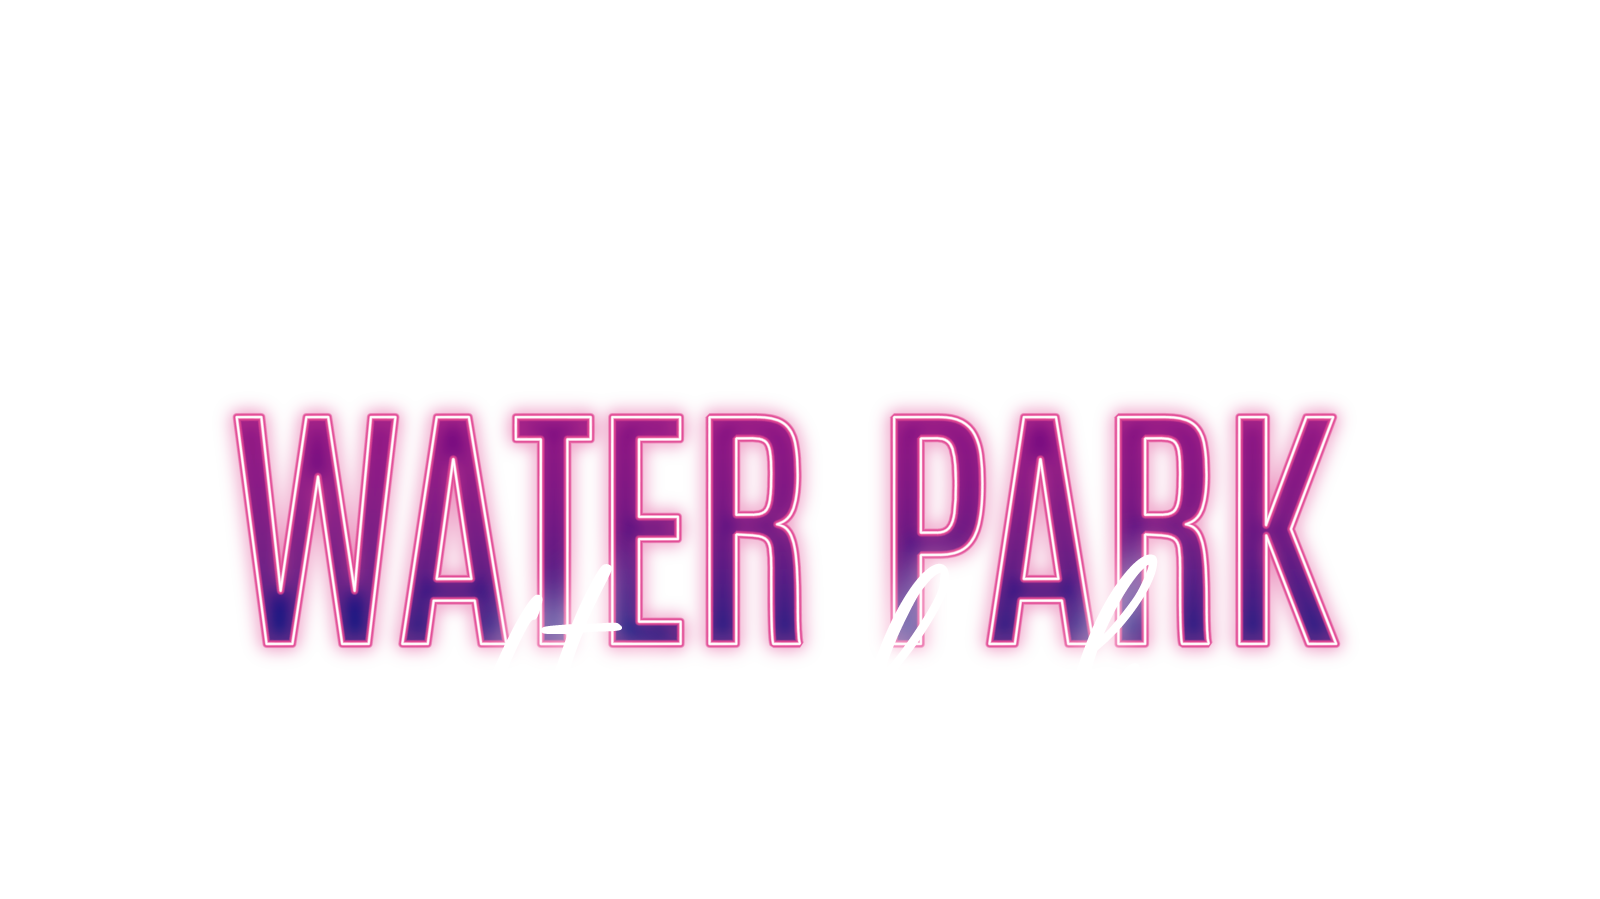 Waterpark Afterdark text, with Zoombezi Bay logo on top